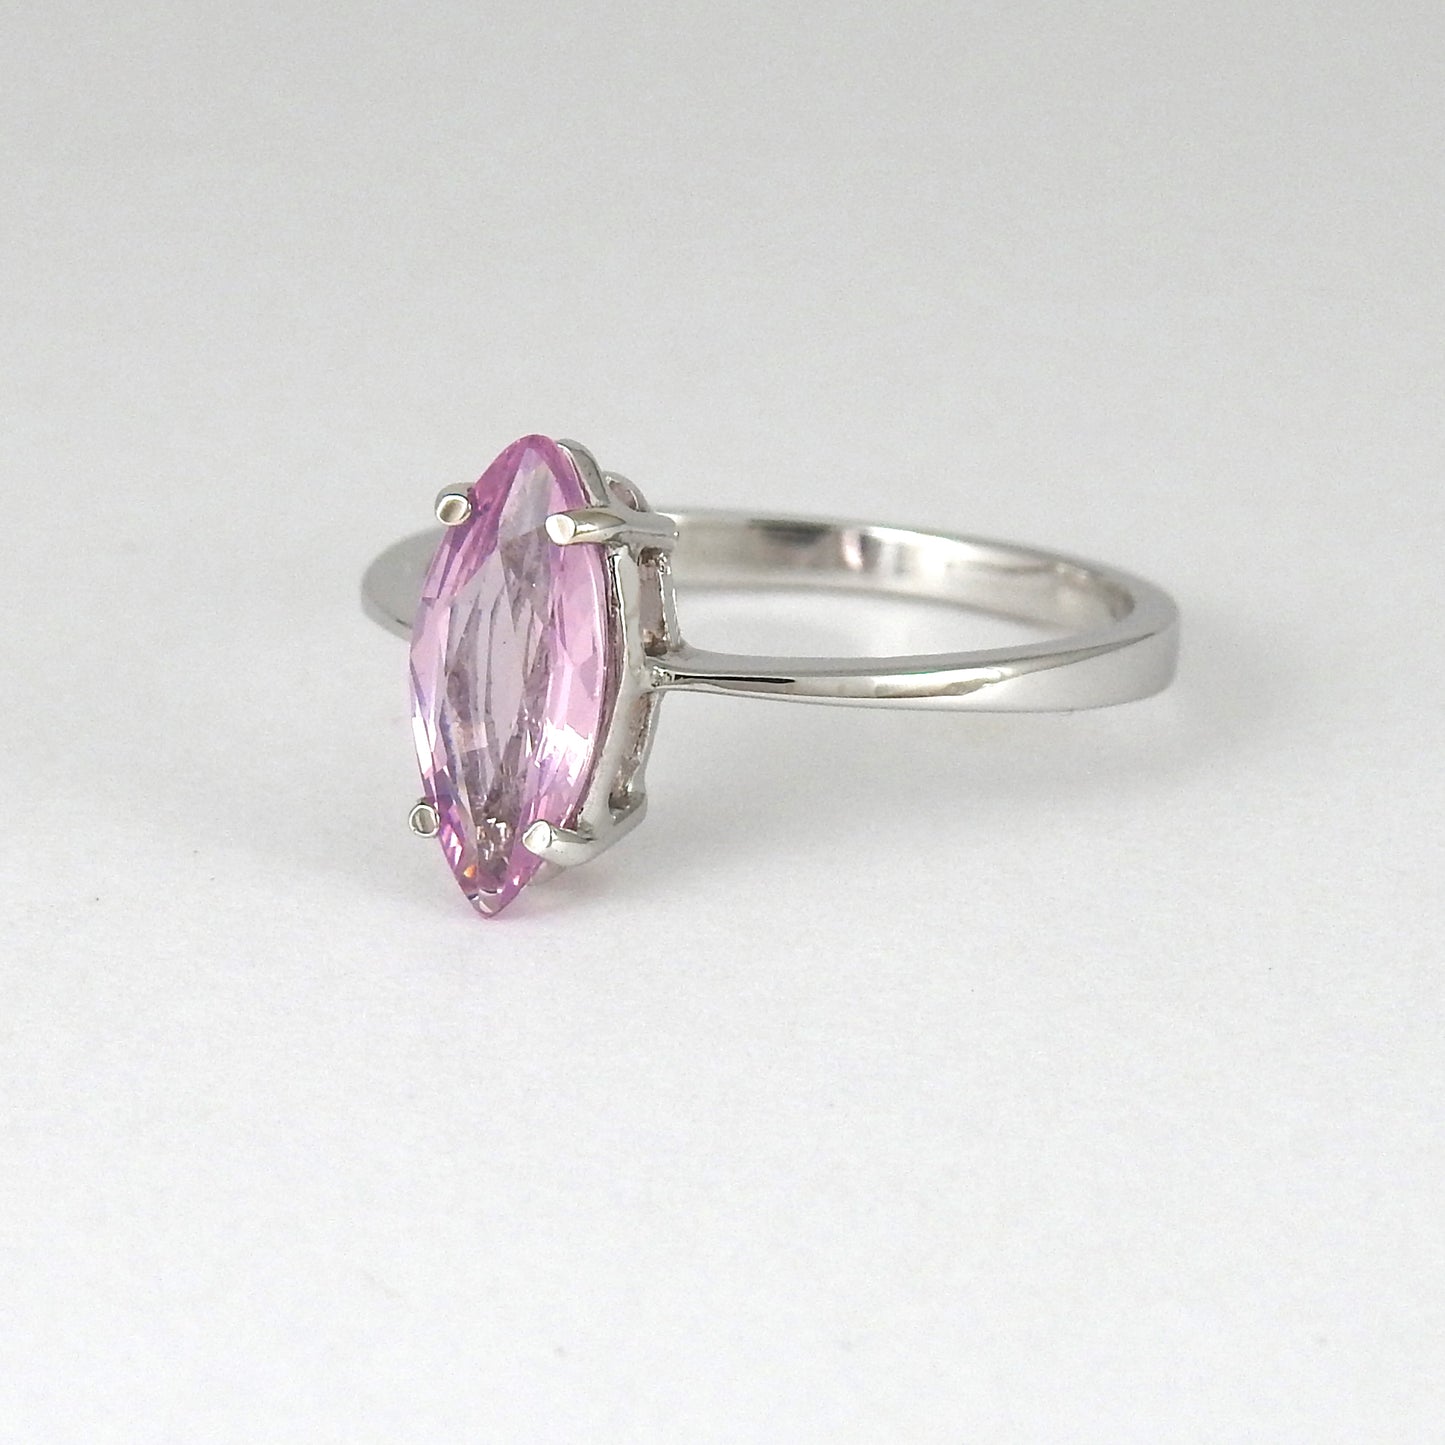 Marquise purple spinel ring